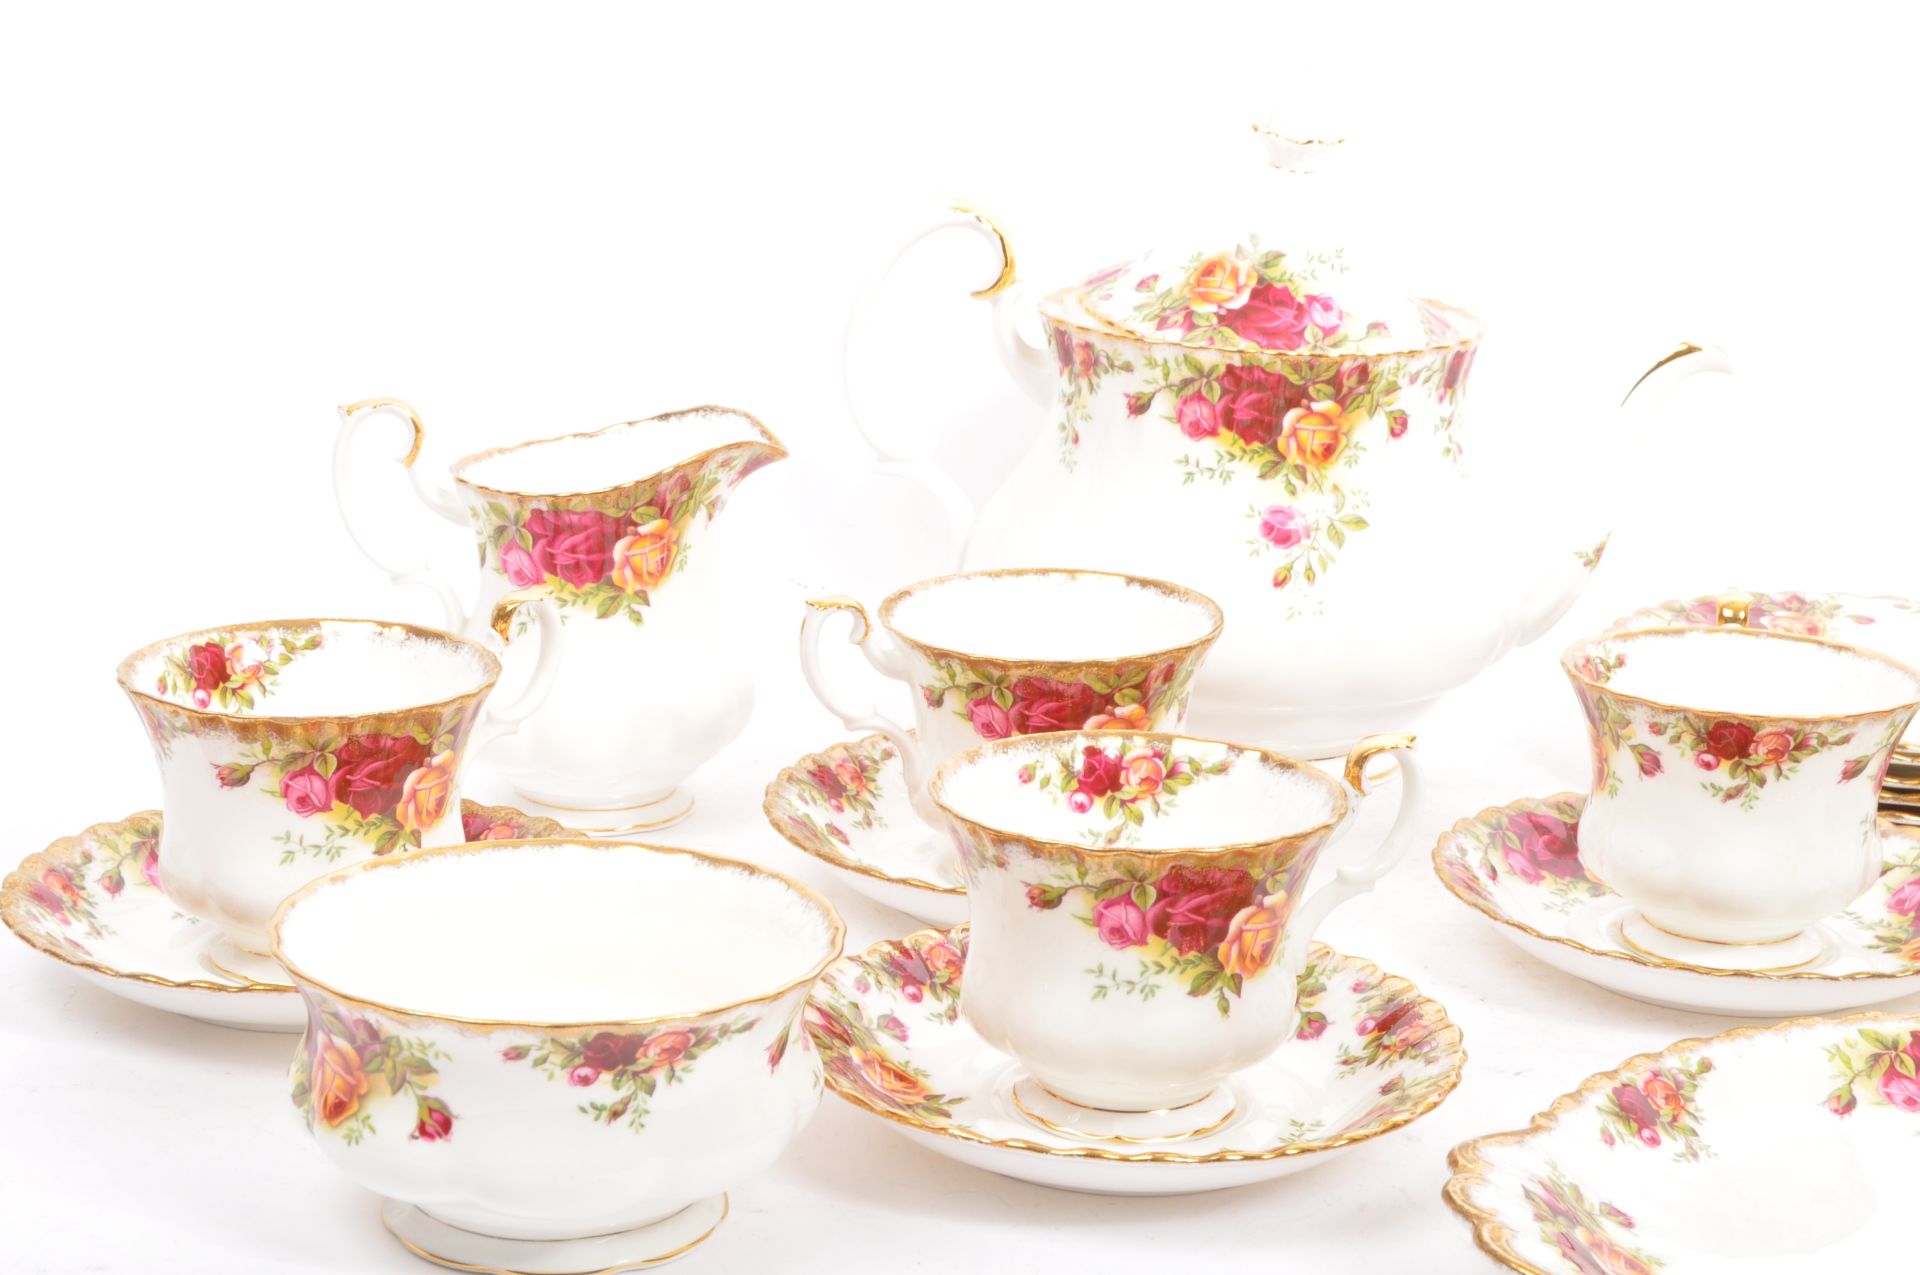 VINTAGE ROYAL ALBERT OLD COUNTRY ROSES 6 PIECE TEA SET - Image 2 of 8